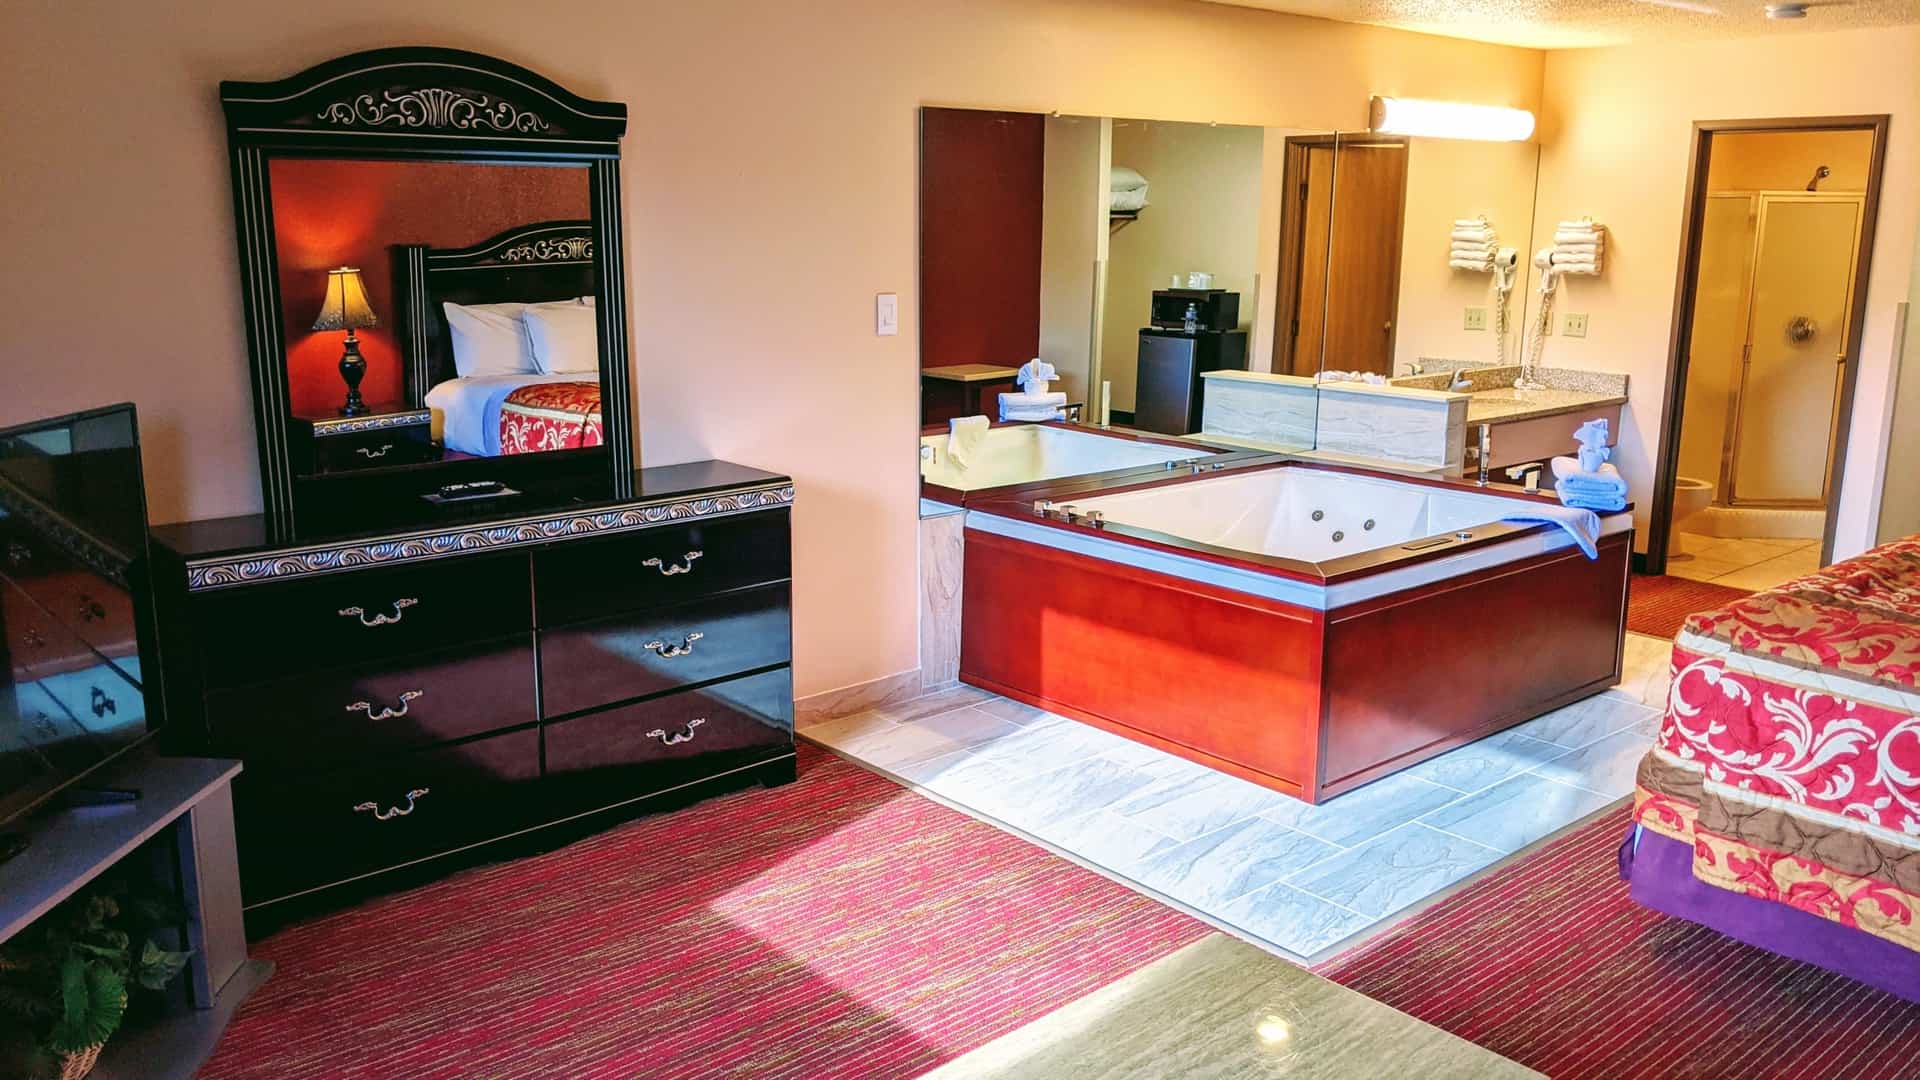 Executive Whirlpool Studio At Grand Marquis Hotel In Wisconsin Dells, Wi